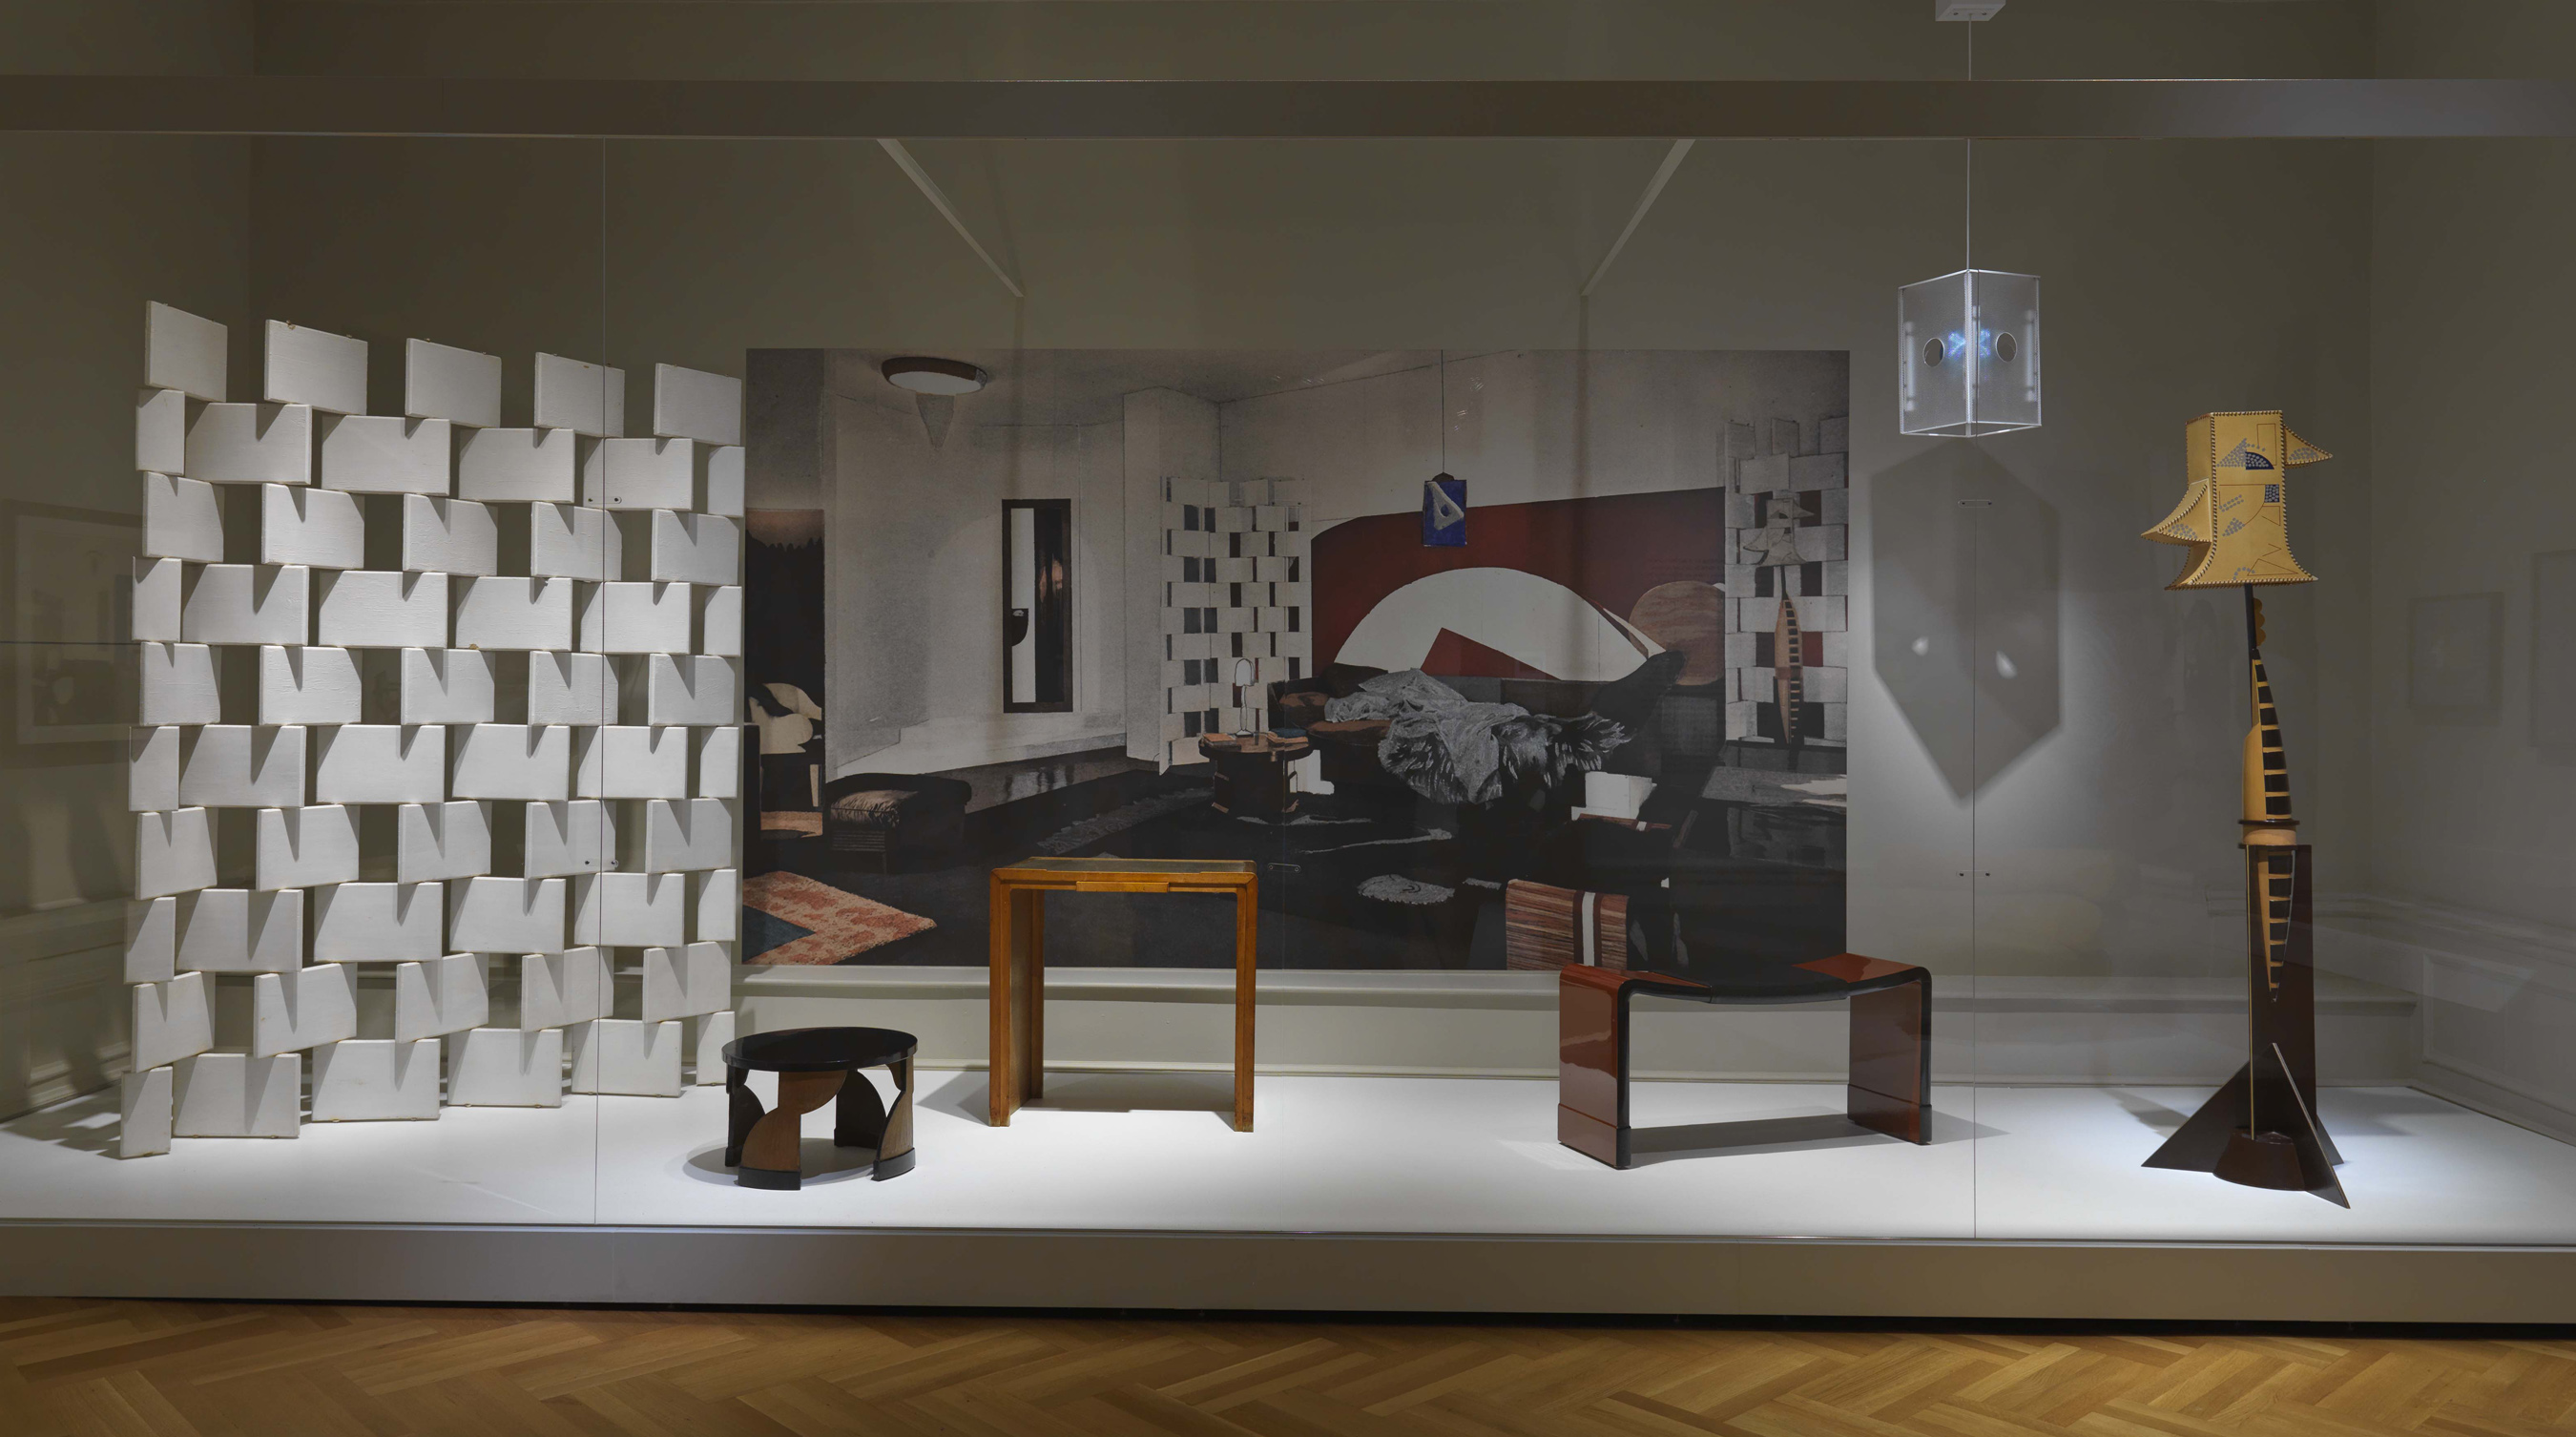 Exhibition case of Gray's screen, 2 tables, bench, and 2 lamps for the 1923 Bedroom/Boudoir for Monte Carlo installation.